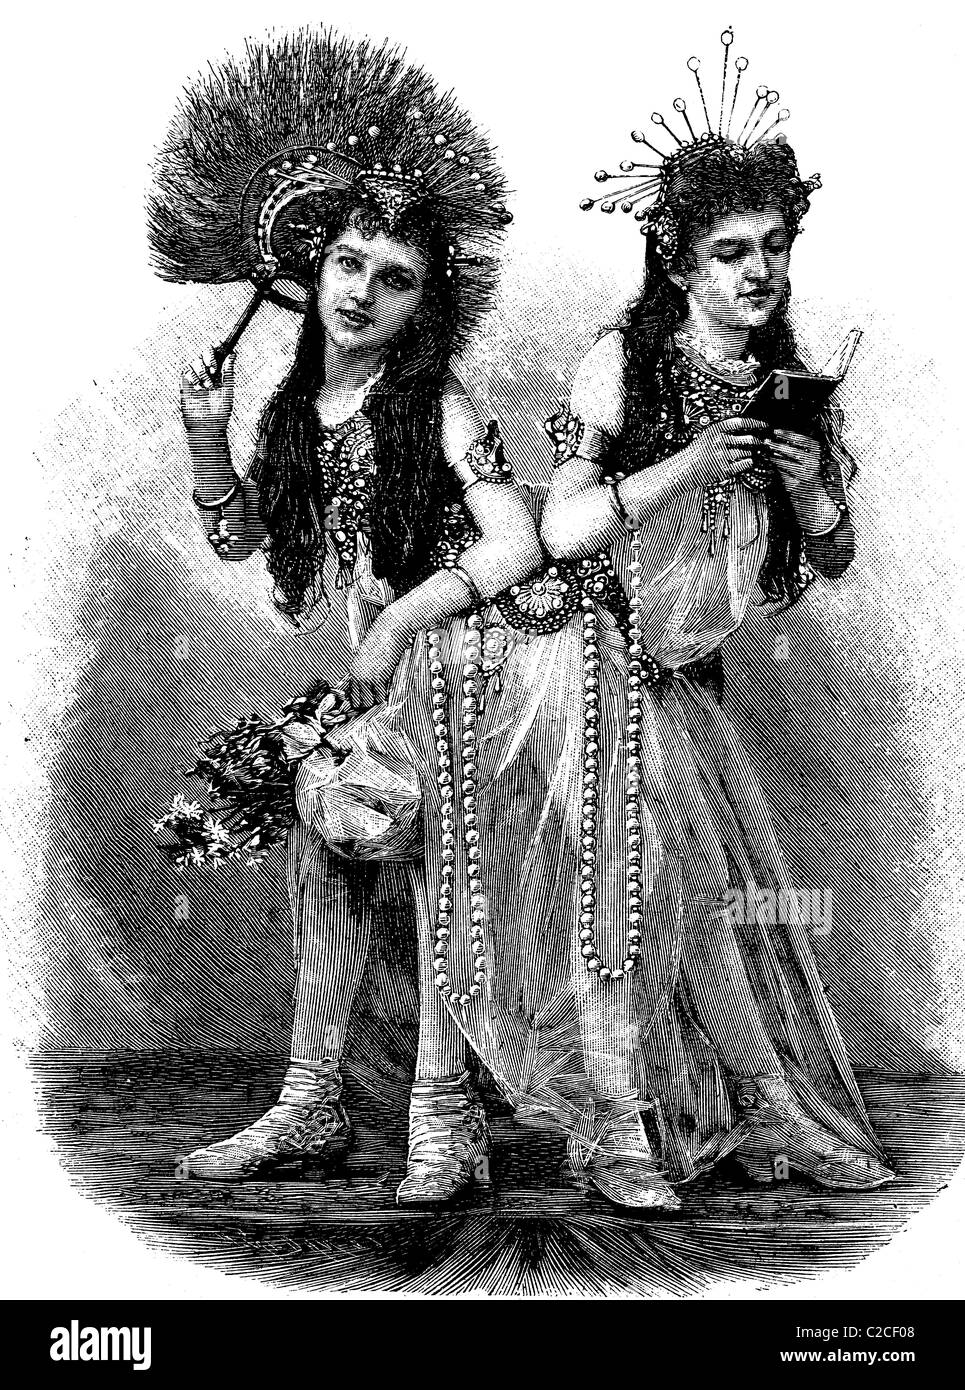 Siamese twins, sisters grown together, historical illustration circa 1893 Stock Photo